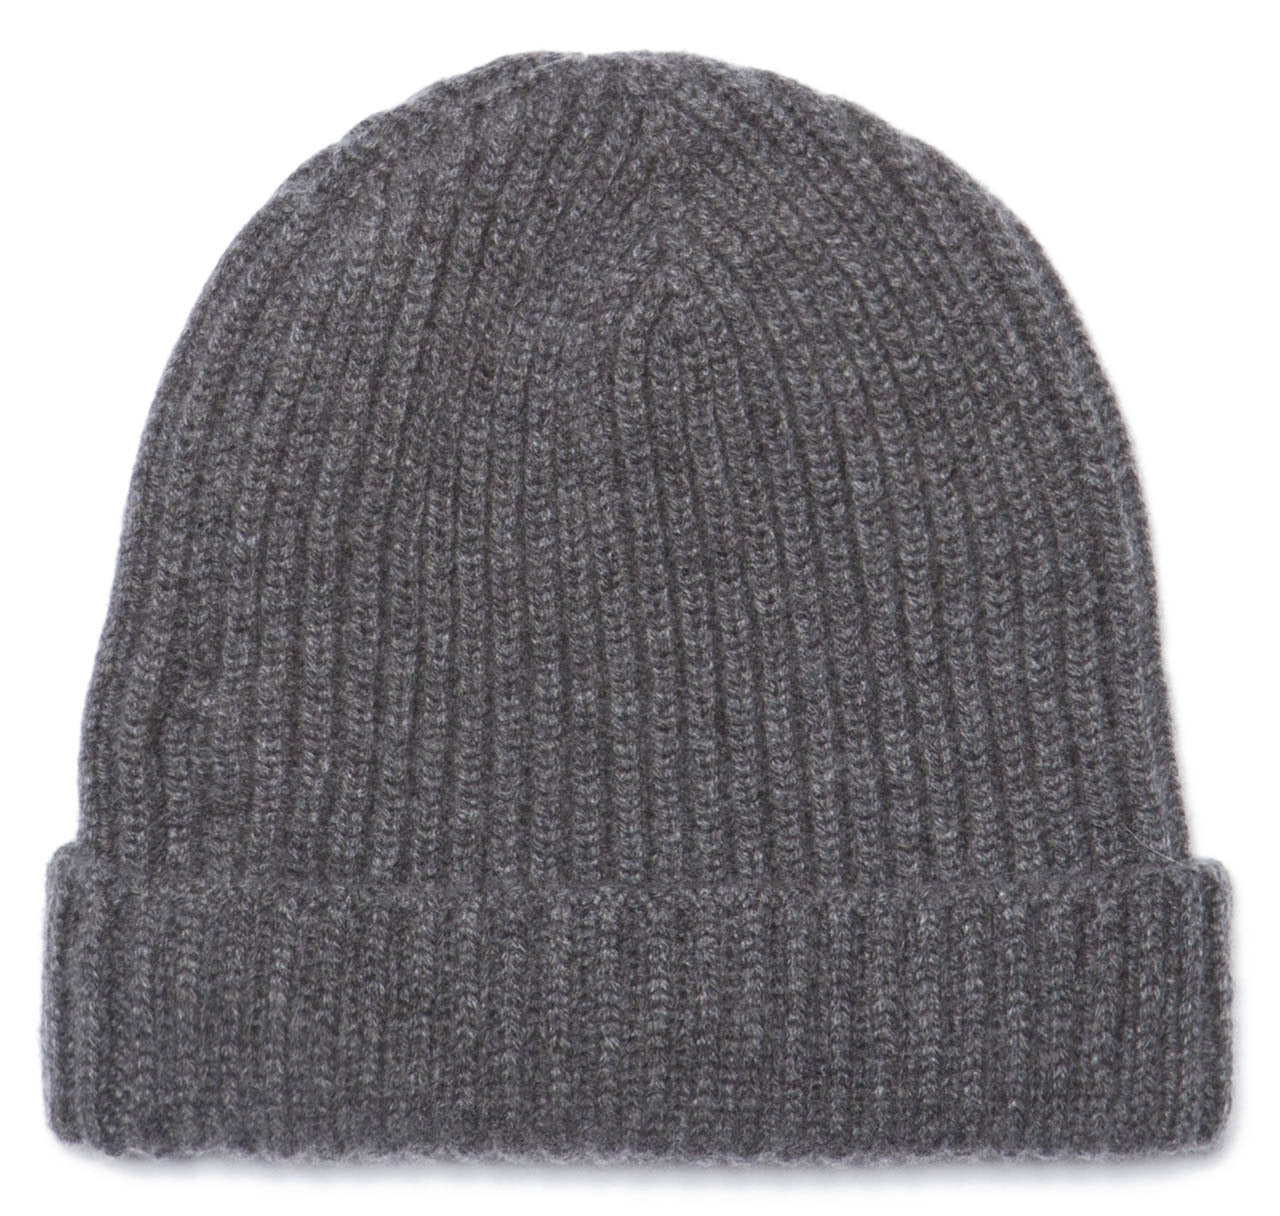 Classic Pure Cashmere Grey Watch Cap – SIR JACK'S